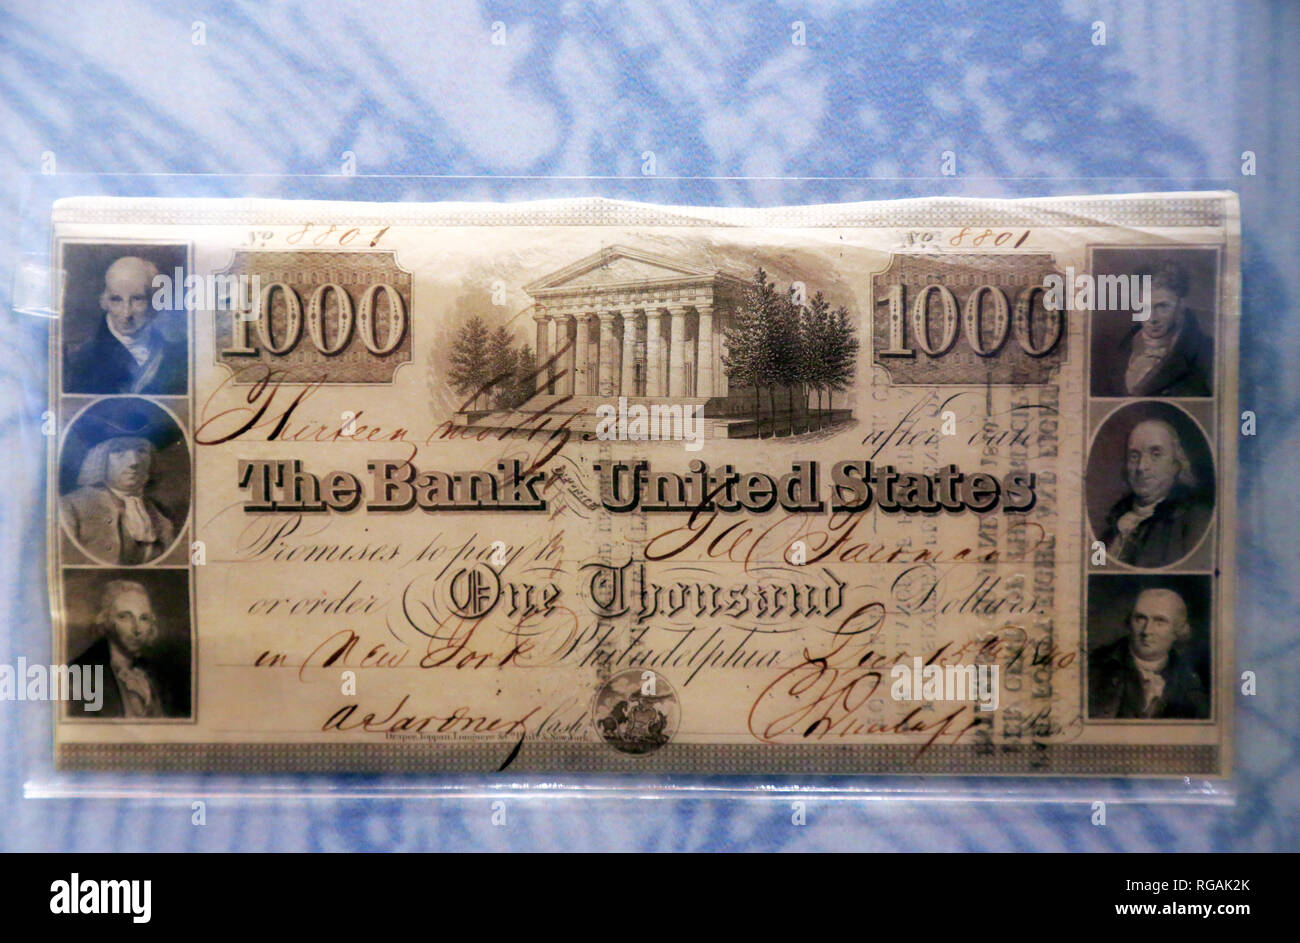 A historical 1000 US dollars paper currency display at Money Museum in Federal Reserve Bank of Chicago. Illinois.USA Stock Photo